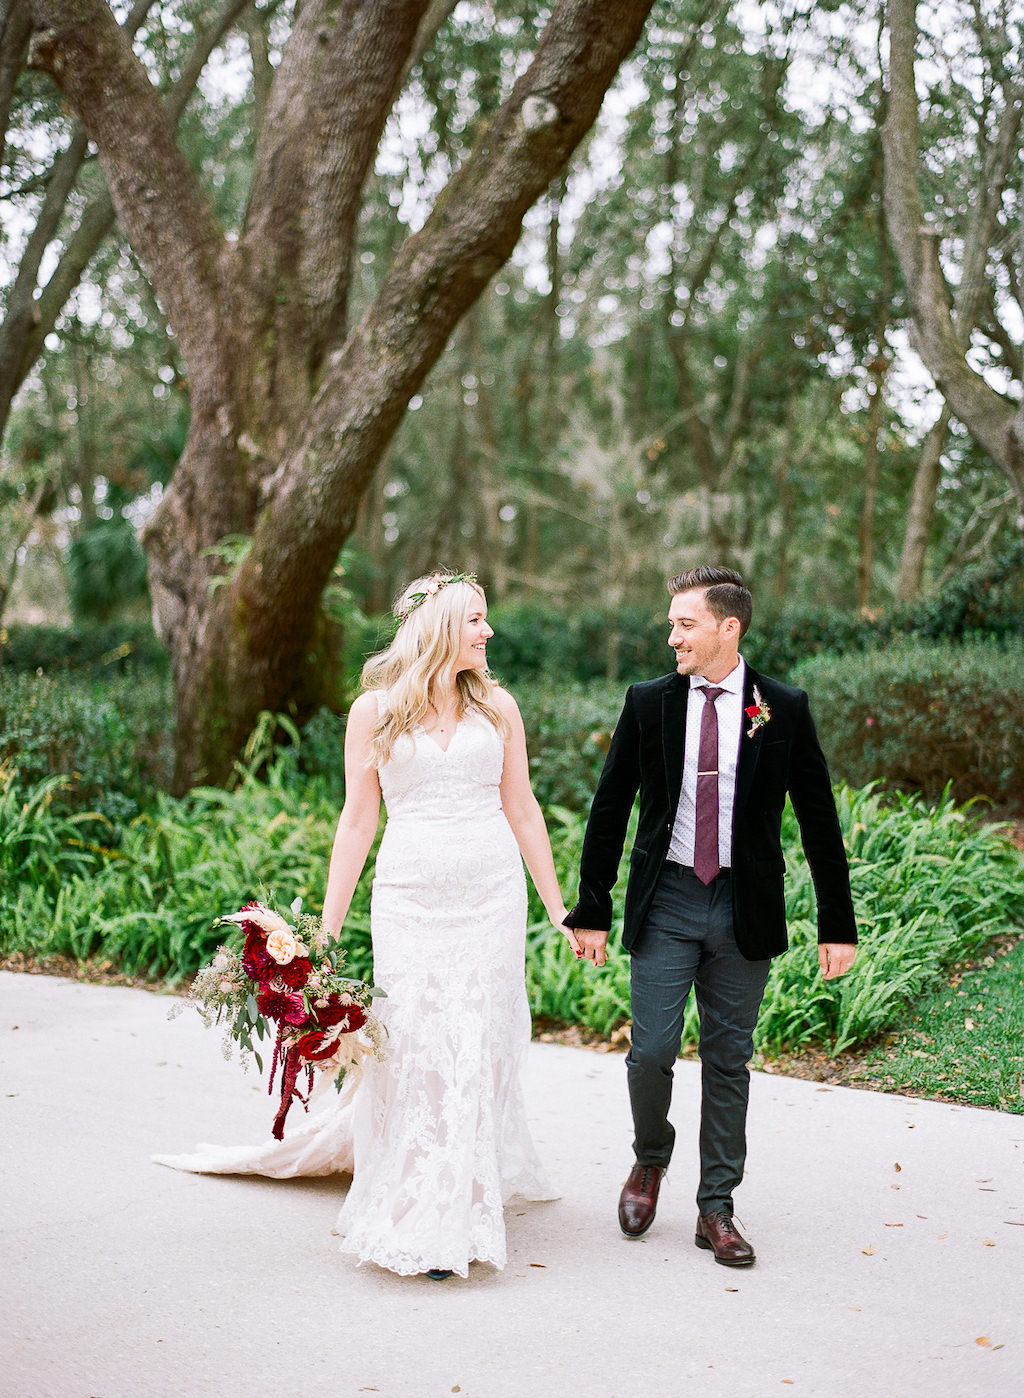 Outdoor Florida Bride and Groom Wedding Portrait, Bride in Fitted Lace and Tanka Top Strap Wedding Dress, Groom in Velvet Tuxedo | Tampa Bay Bridal Shop Nikki's Glitz and Glam Boutique